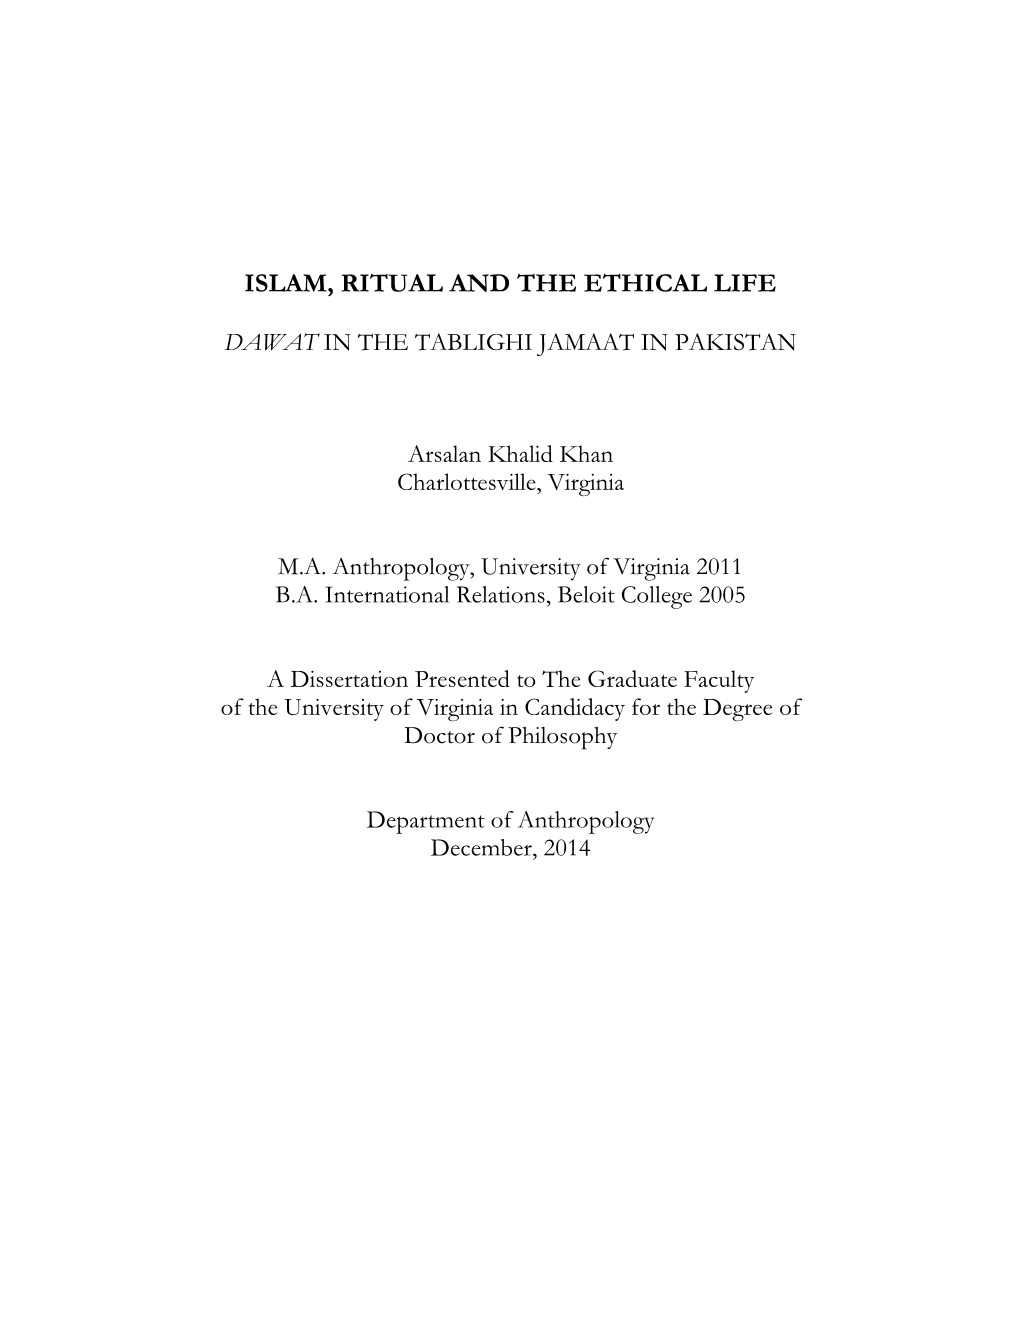 Islam, Ritual and the Ethical Life